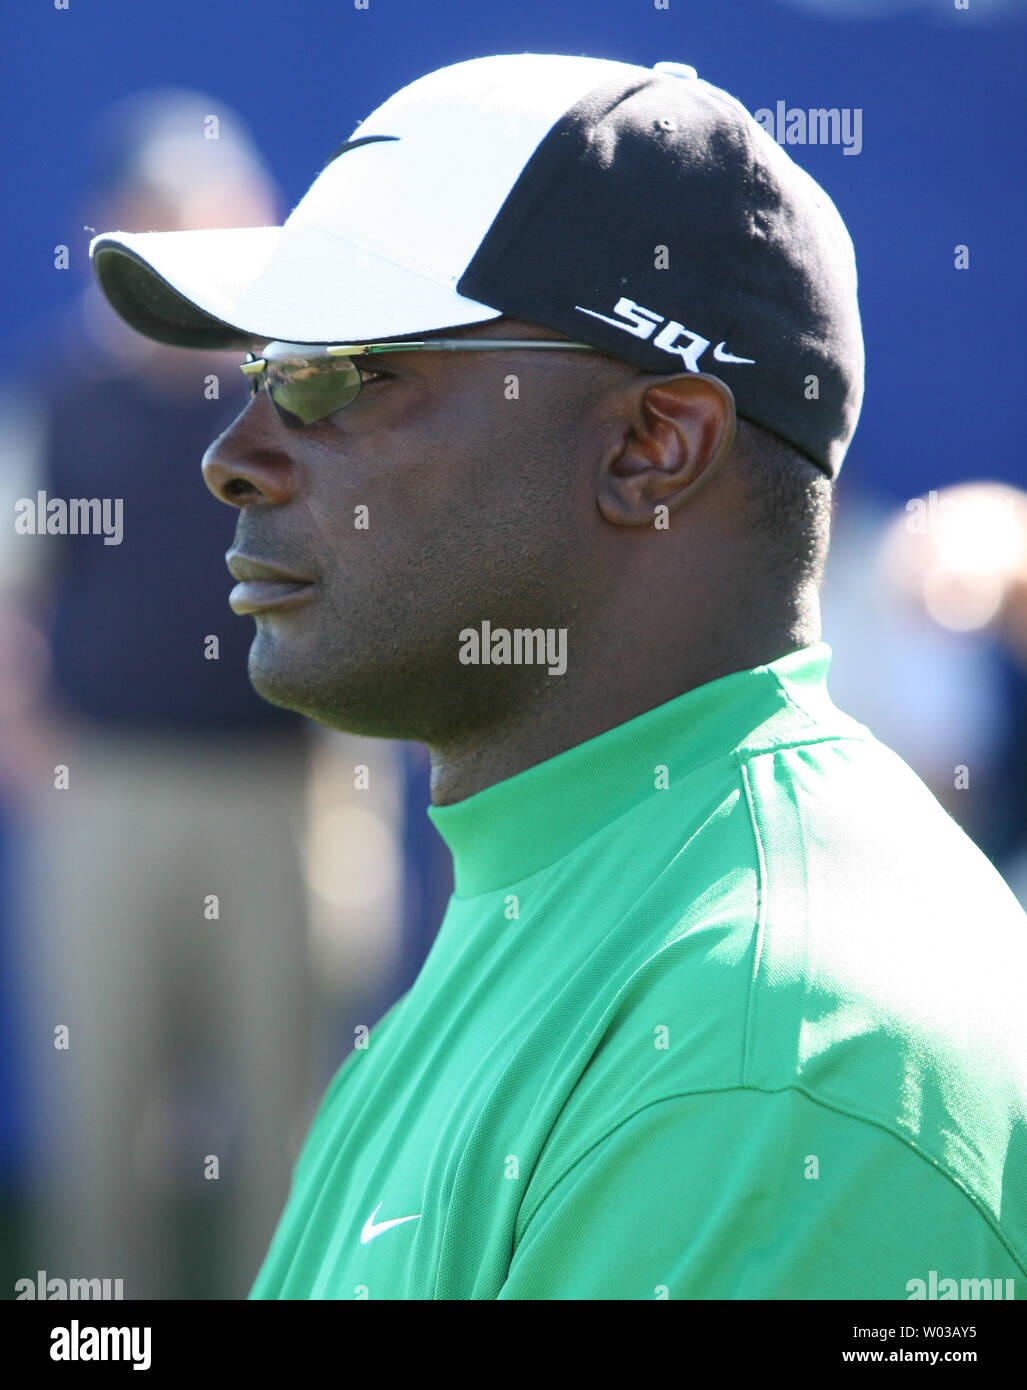 Former NFL wide receiver Sterling Sharpe arrives at the first tee during the Bob Hope Chrysler Classic in Palm Desert, California on January 19, 2008.   The tournament teams professional and amateur golfers with celebrities and has been raising money for a variety of charities since 1960.   (UPI Photo/ David Silpa) Stock Photo